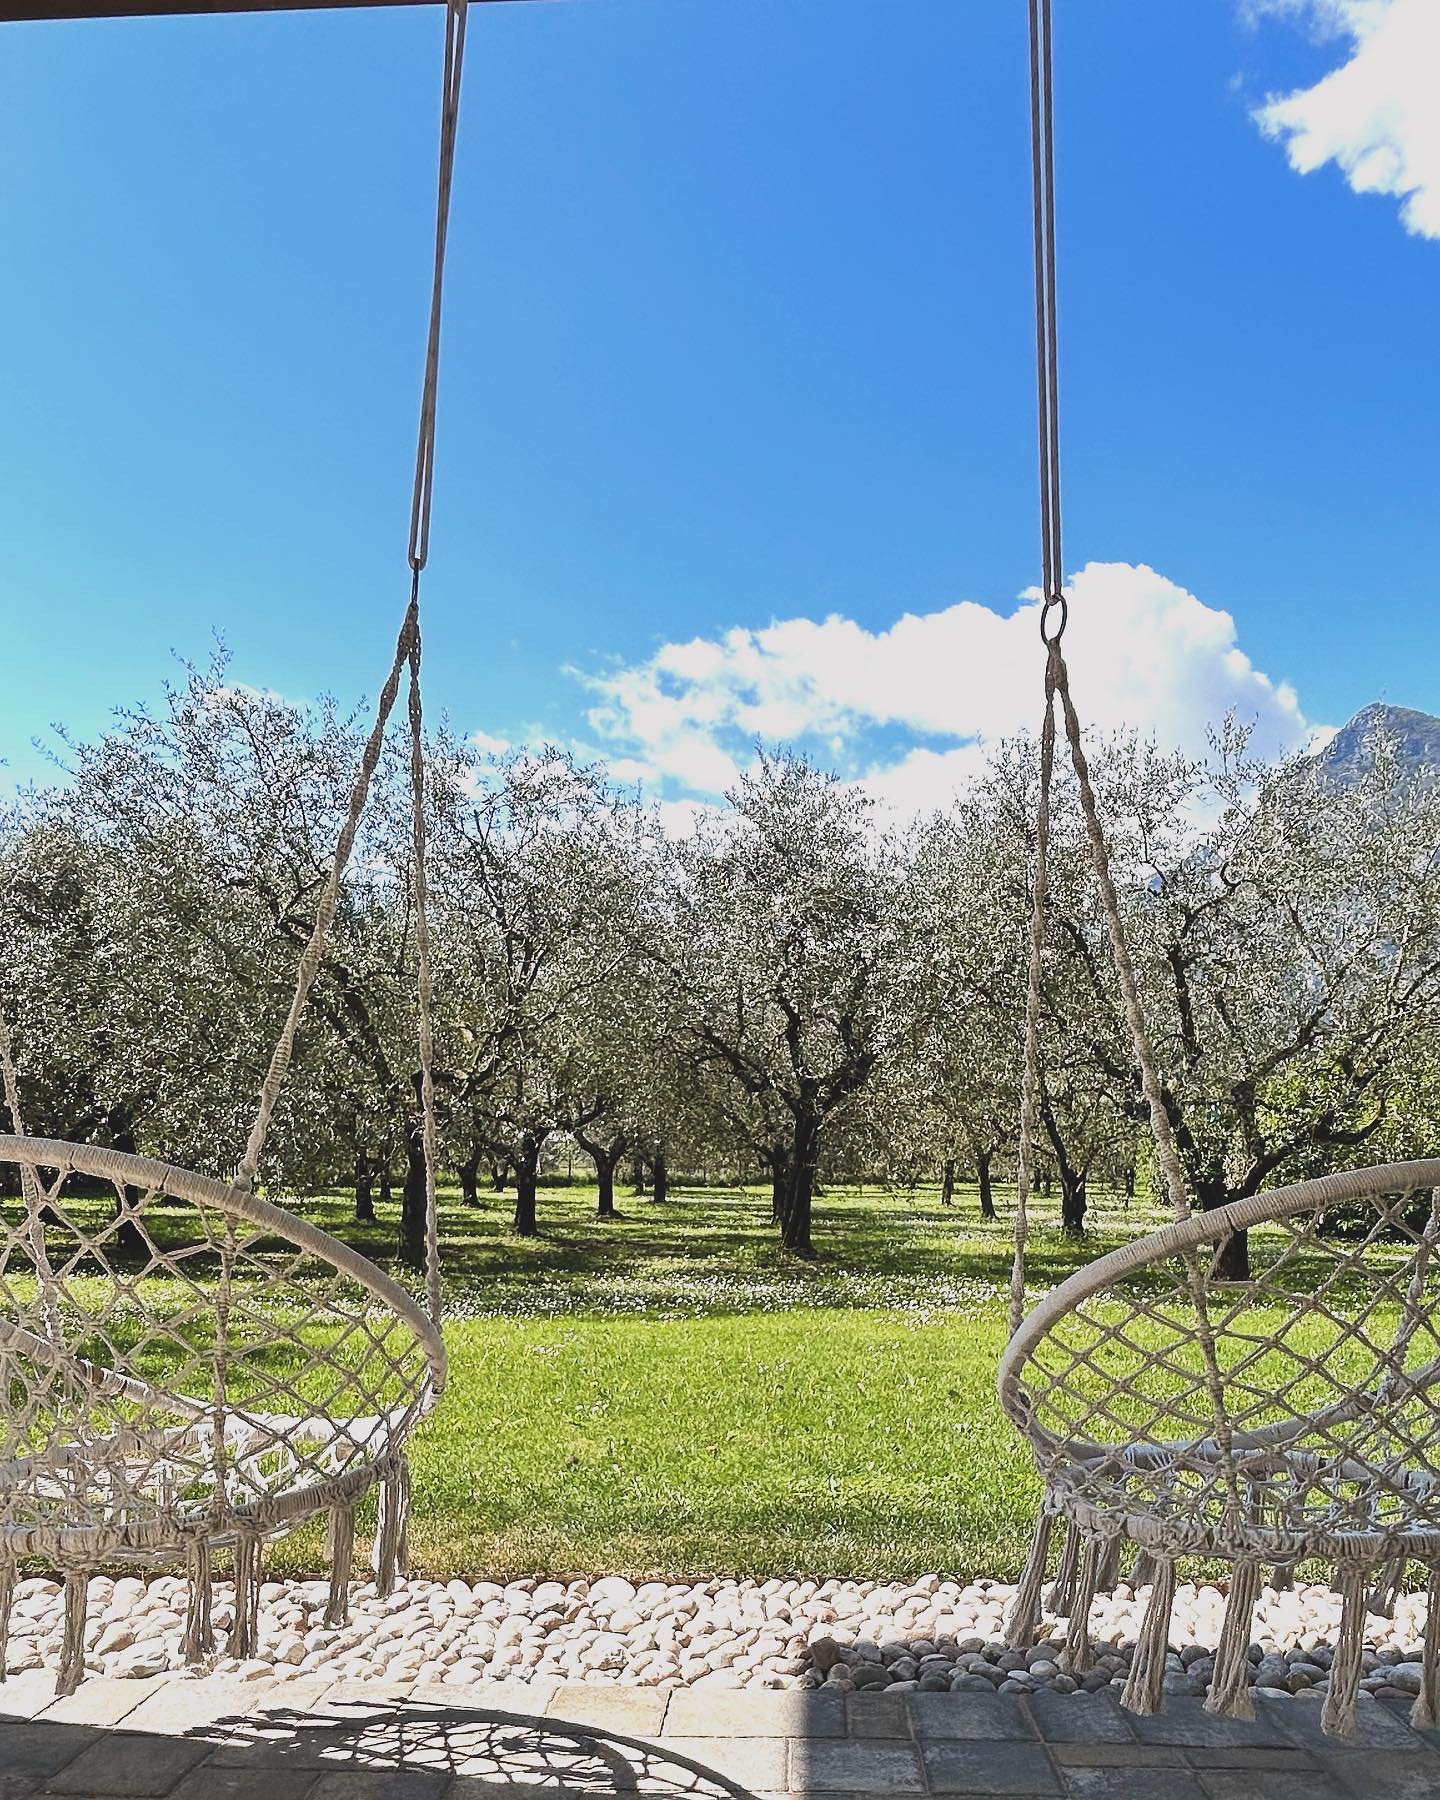 Do you dream of a wedding amidst nature and beauty of olive groves surrounded by mountains and vineyards with only the tweeting of birds to be heard this could be your dream wedding location ! For more information contact me and take a look at our be